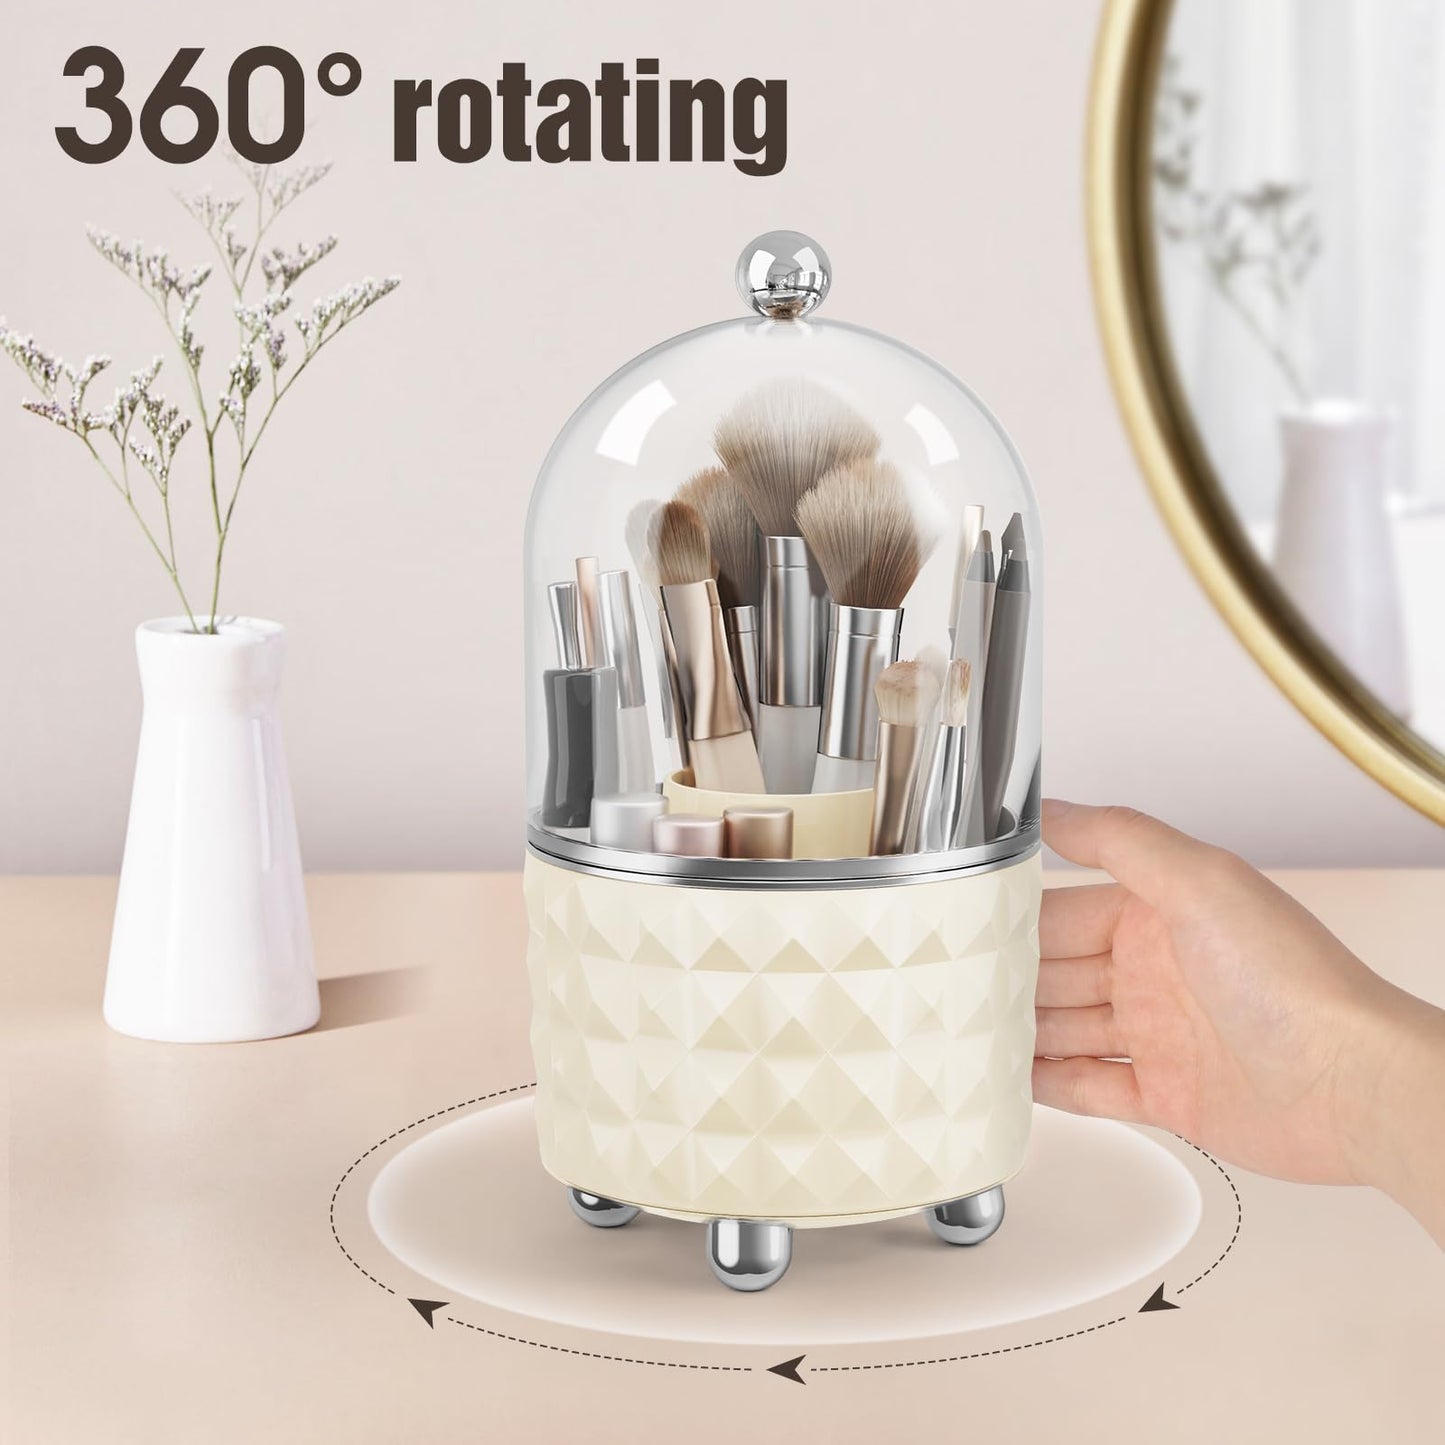 Rosoenvi Makeup Brush Holder Organizer, 360° Rotating Dustproof Makeup Brushes Organizer for Vanity, 6 Compartment Make Up Brushes Cup with Lid for Countertop Organization, Skincare, Beige